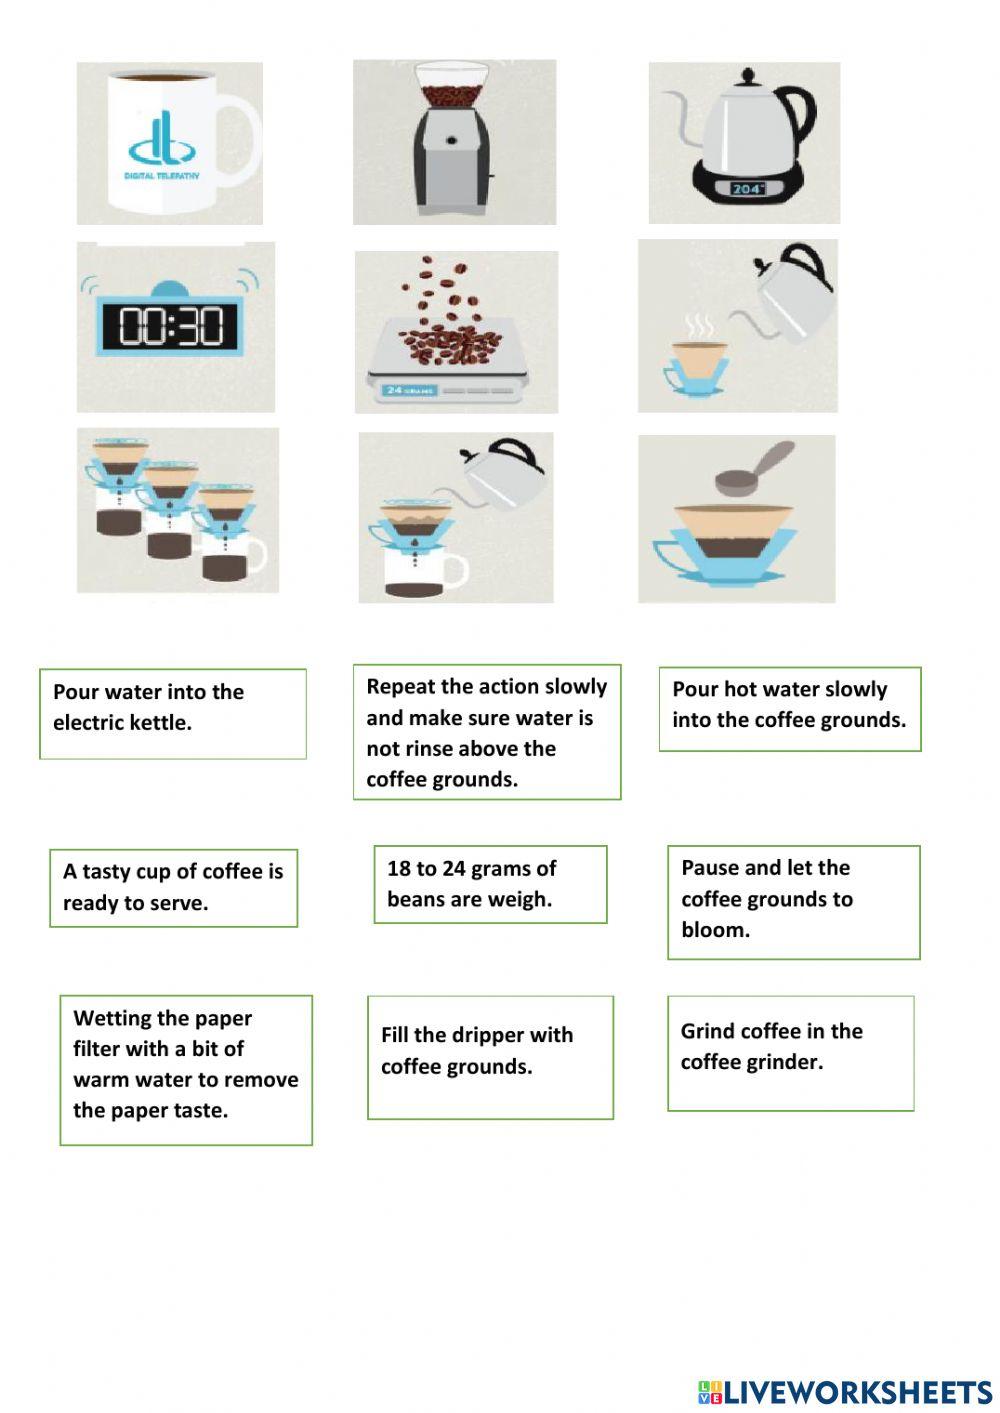 Steps in making perfect cup of coffee